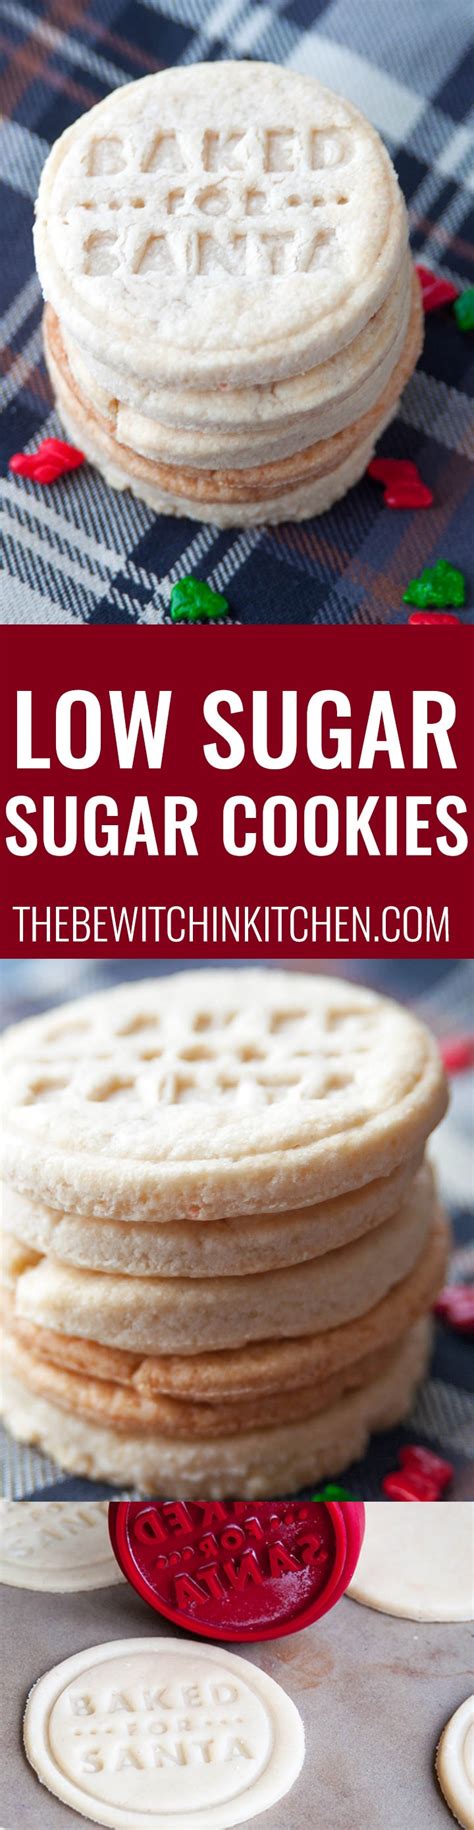 It tasted good i thought, for a low carb/sugar sweet craving. Low Sugar Cookies Recipe | The Bewitchin' Kitchen